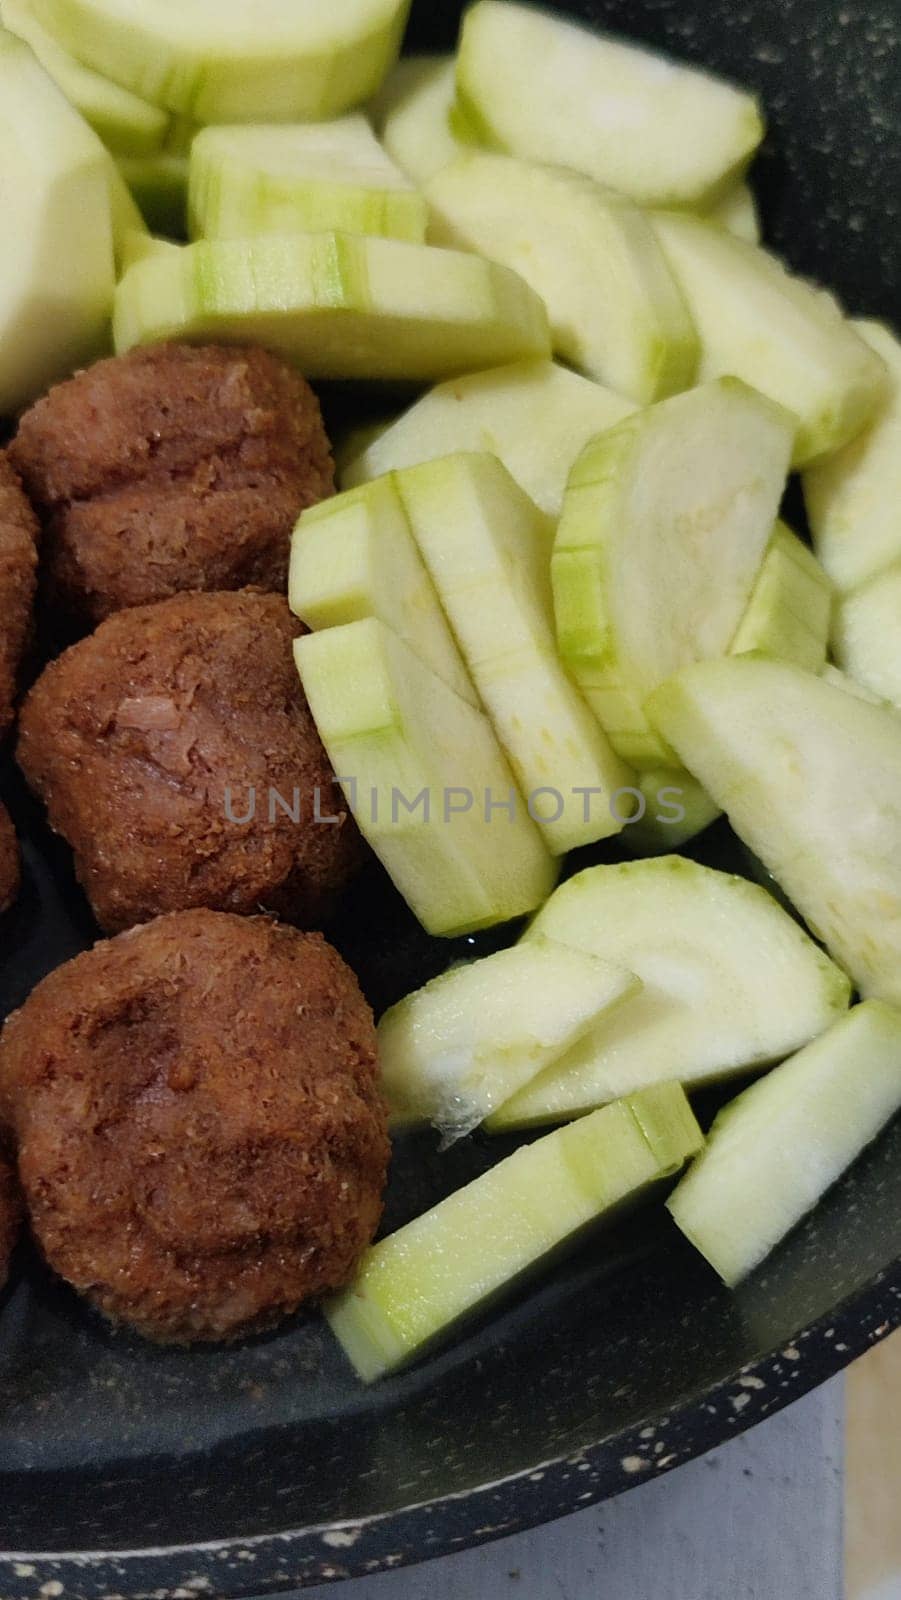 green zucchini and cutlets meatballs in a frying pan, homemade food, cooking. High quality photo